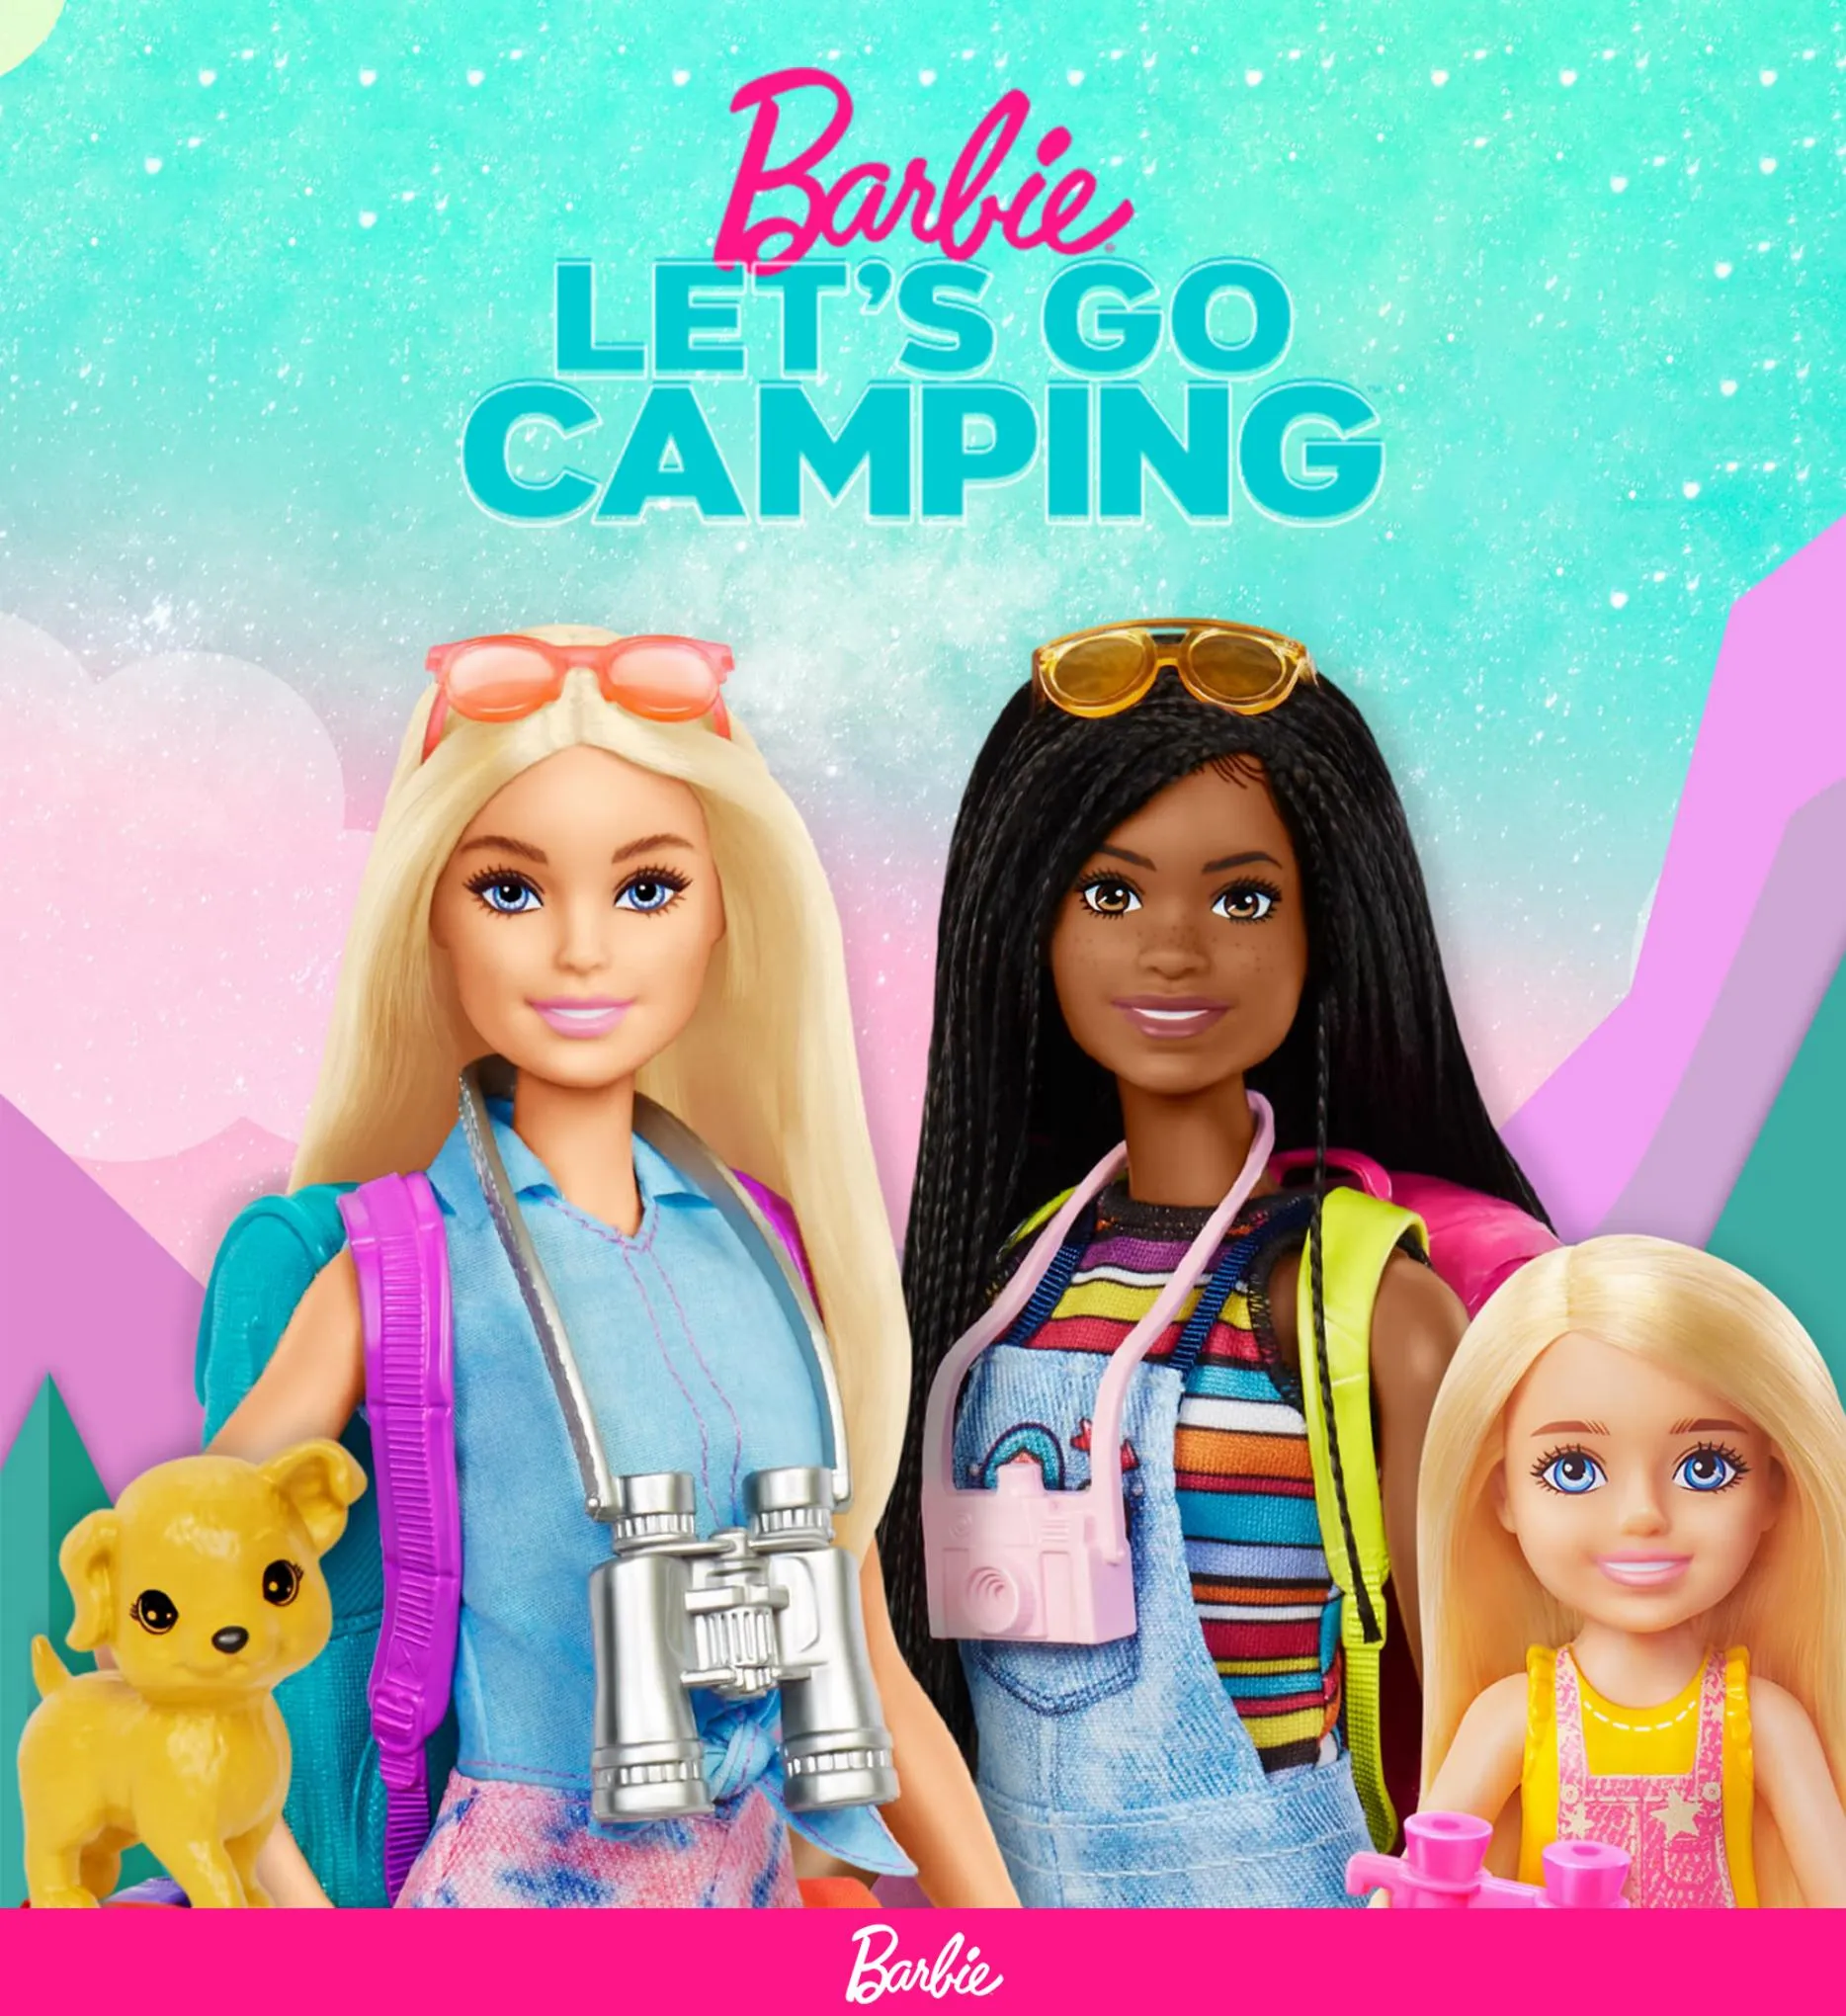 Catalogue Barbie let's go camping, page 00001